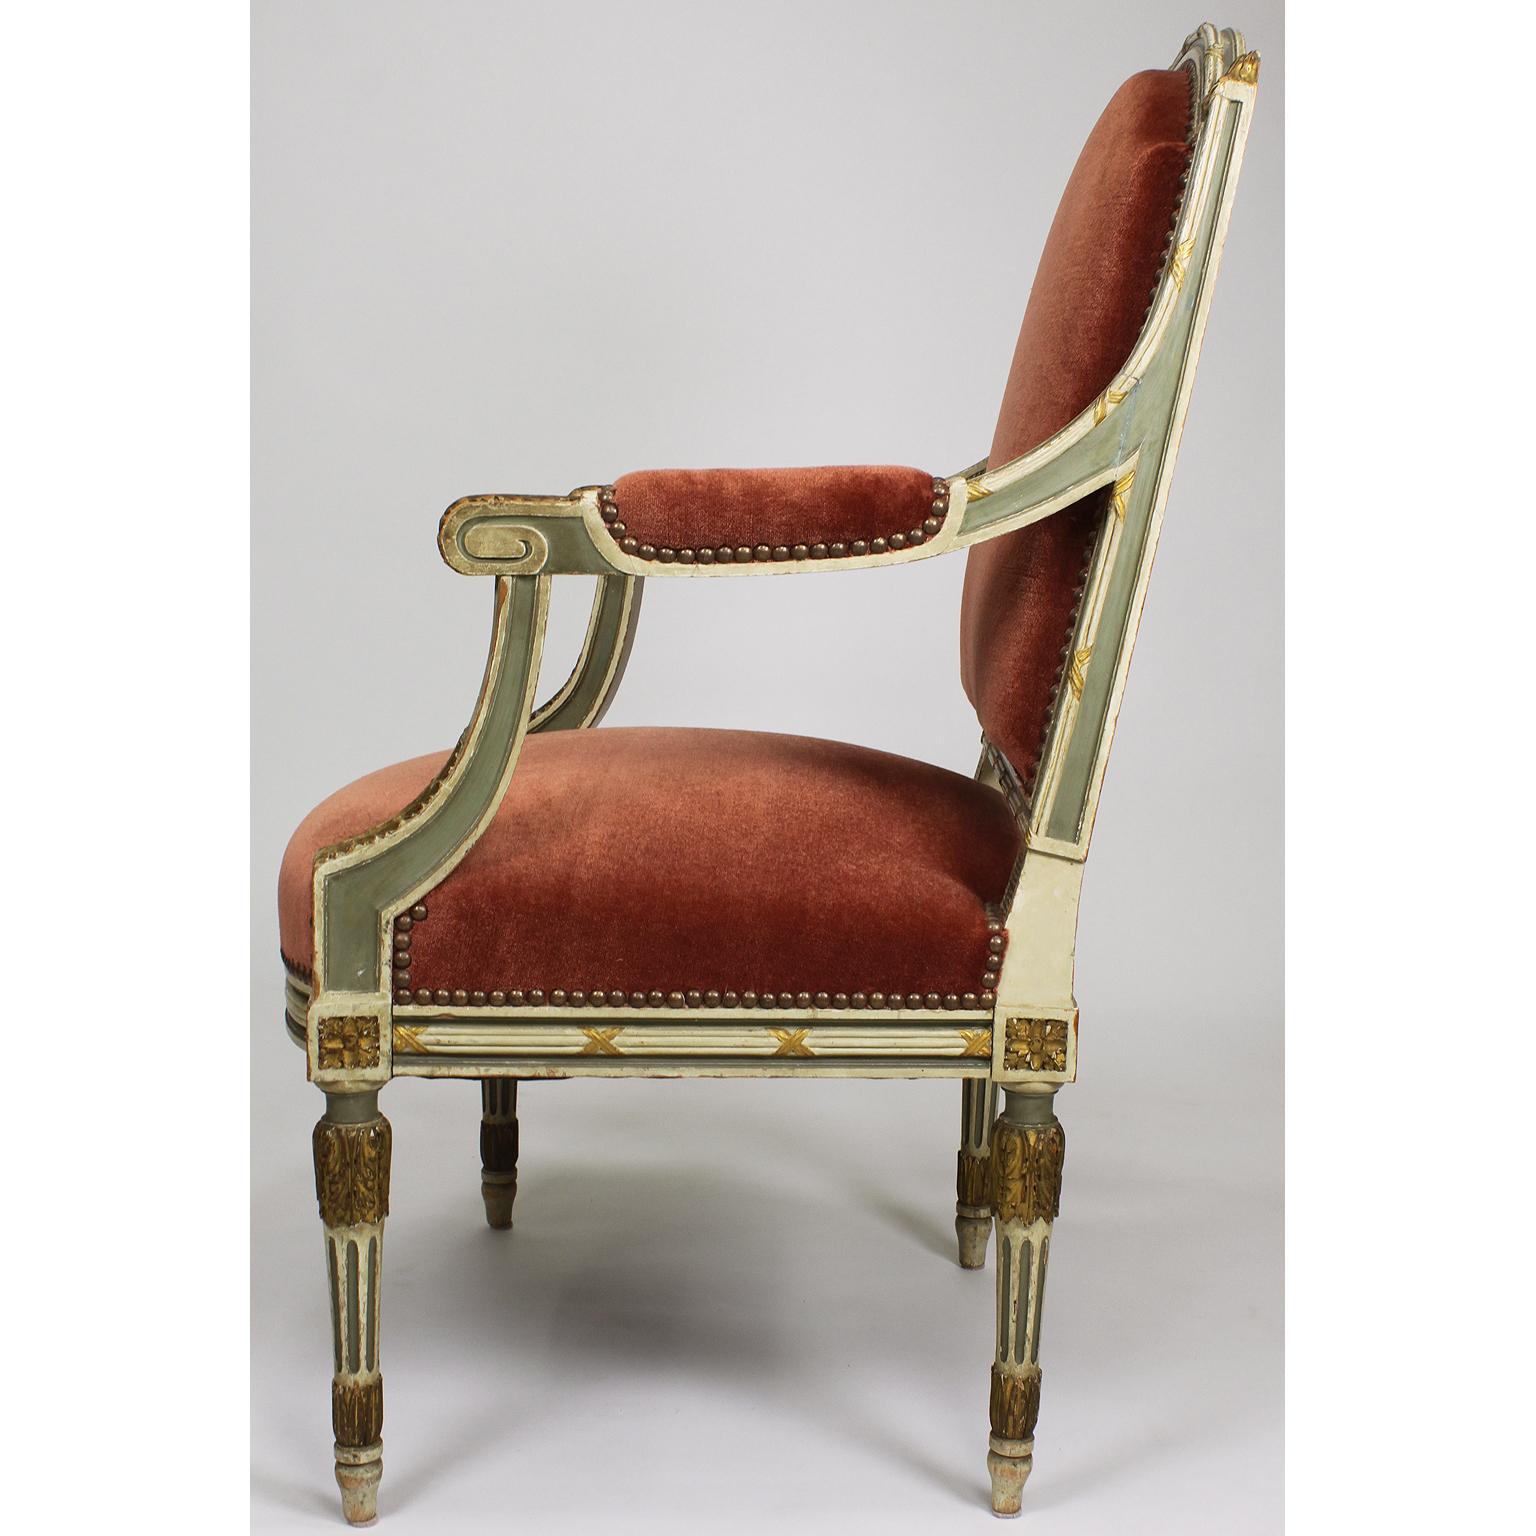 Pair of French Louis XVI Style Gilt, Cream /Green Painted Fauteuils Armchairs For Sale 1